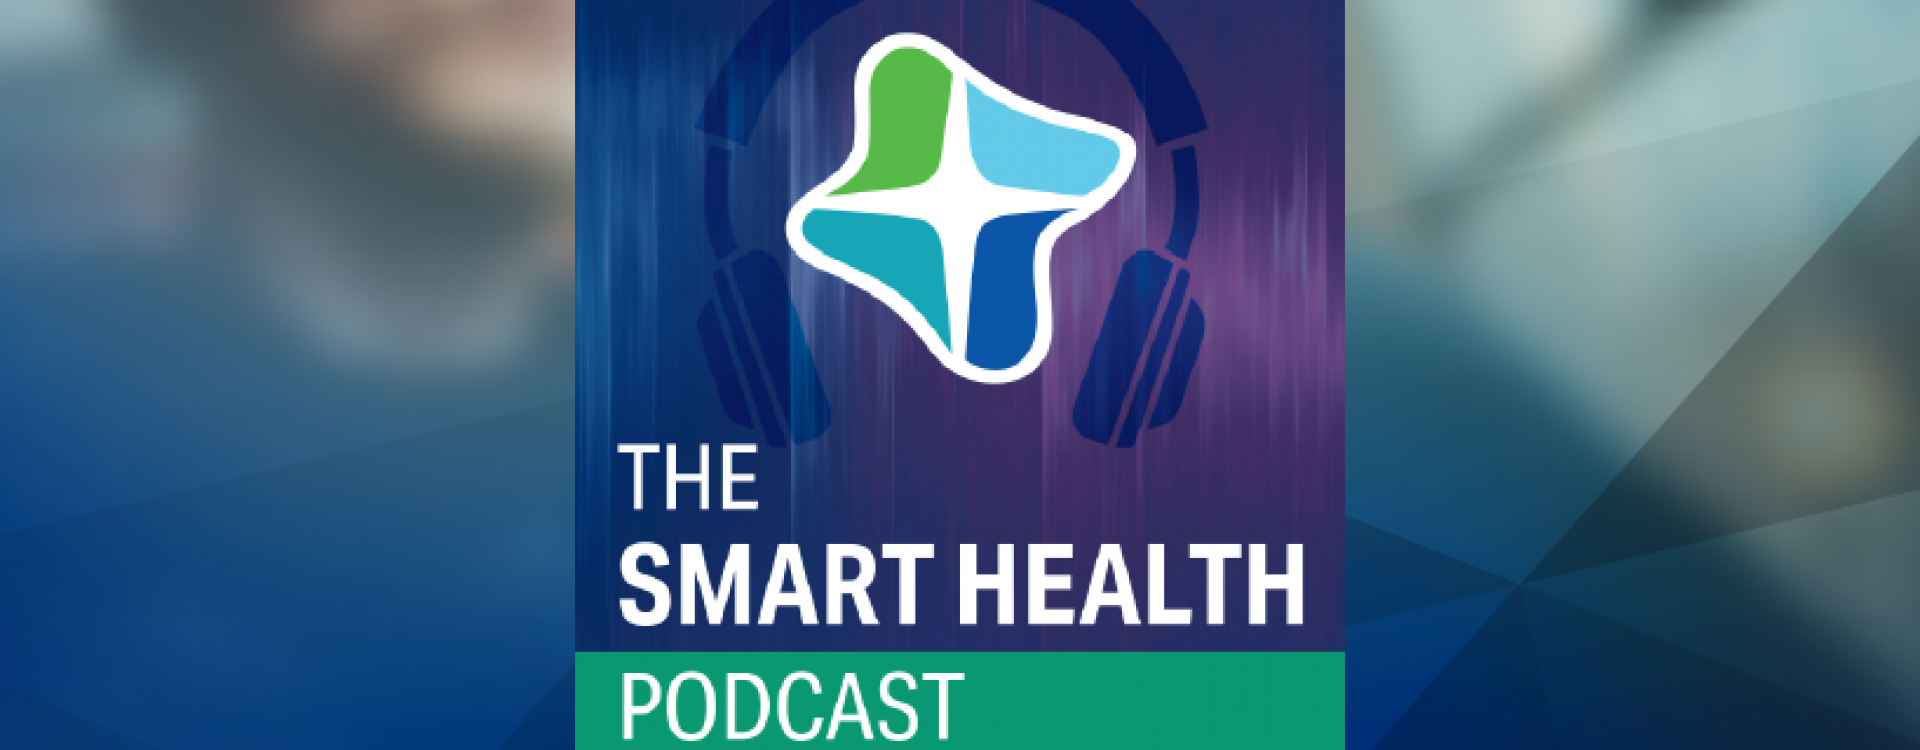 The Smart Health Podcast | How COVID-19 Is Changing the Healthcare Landscape